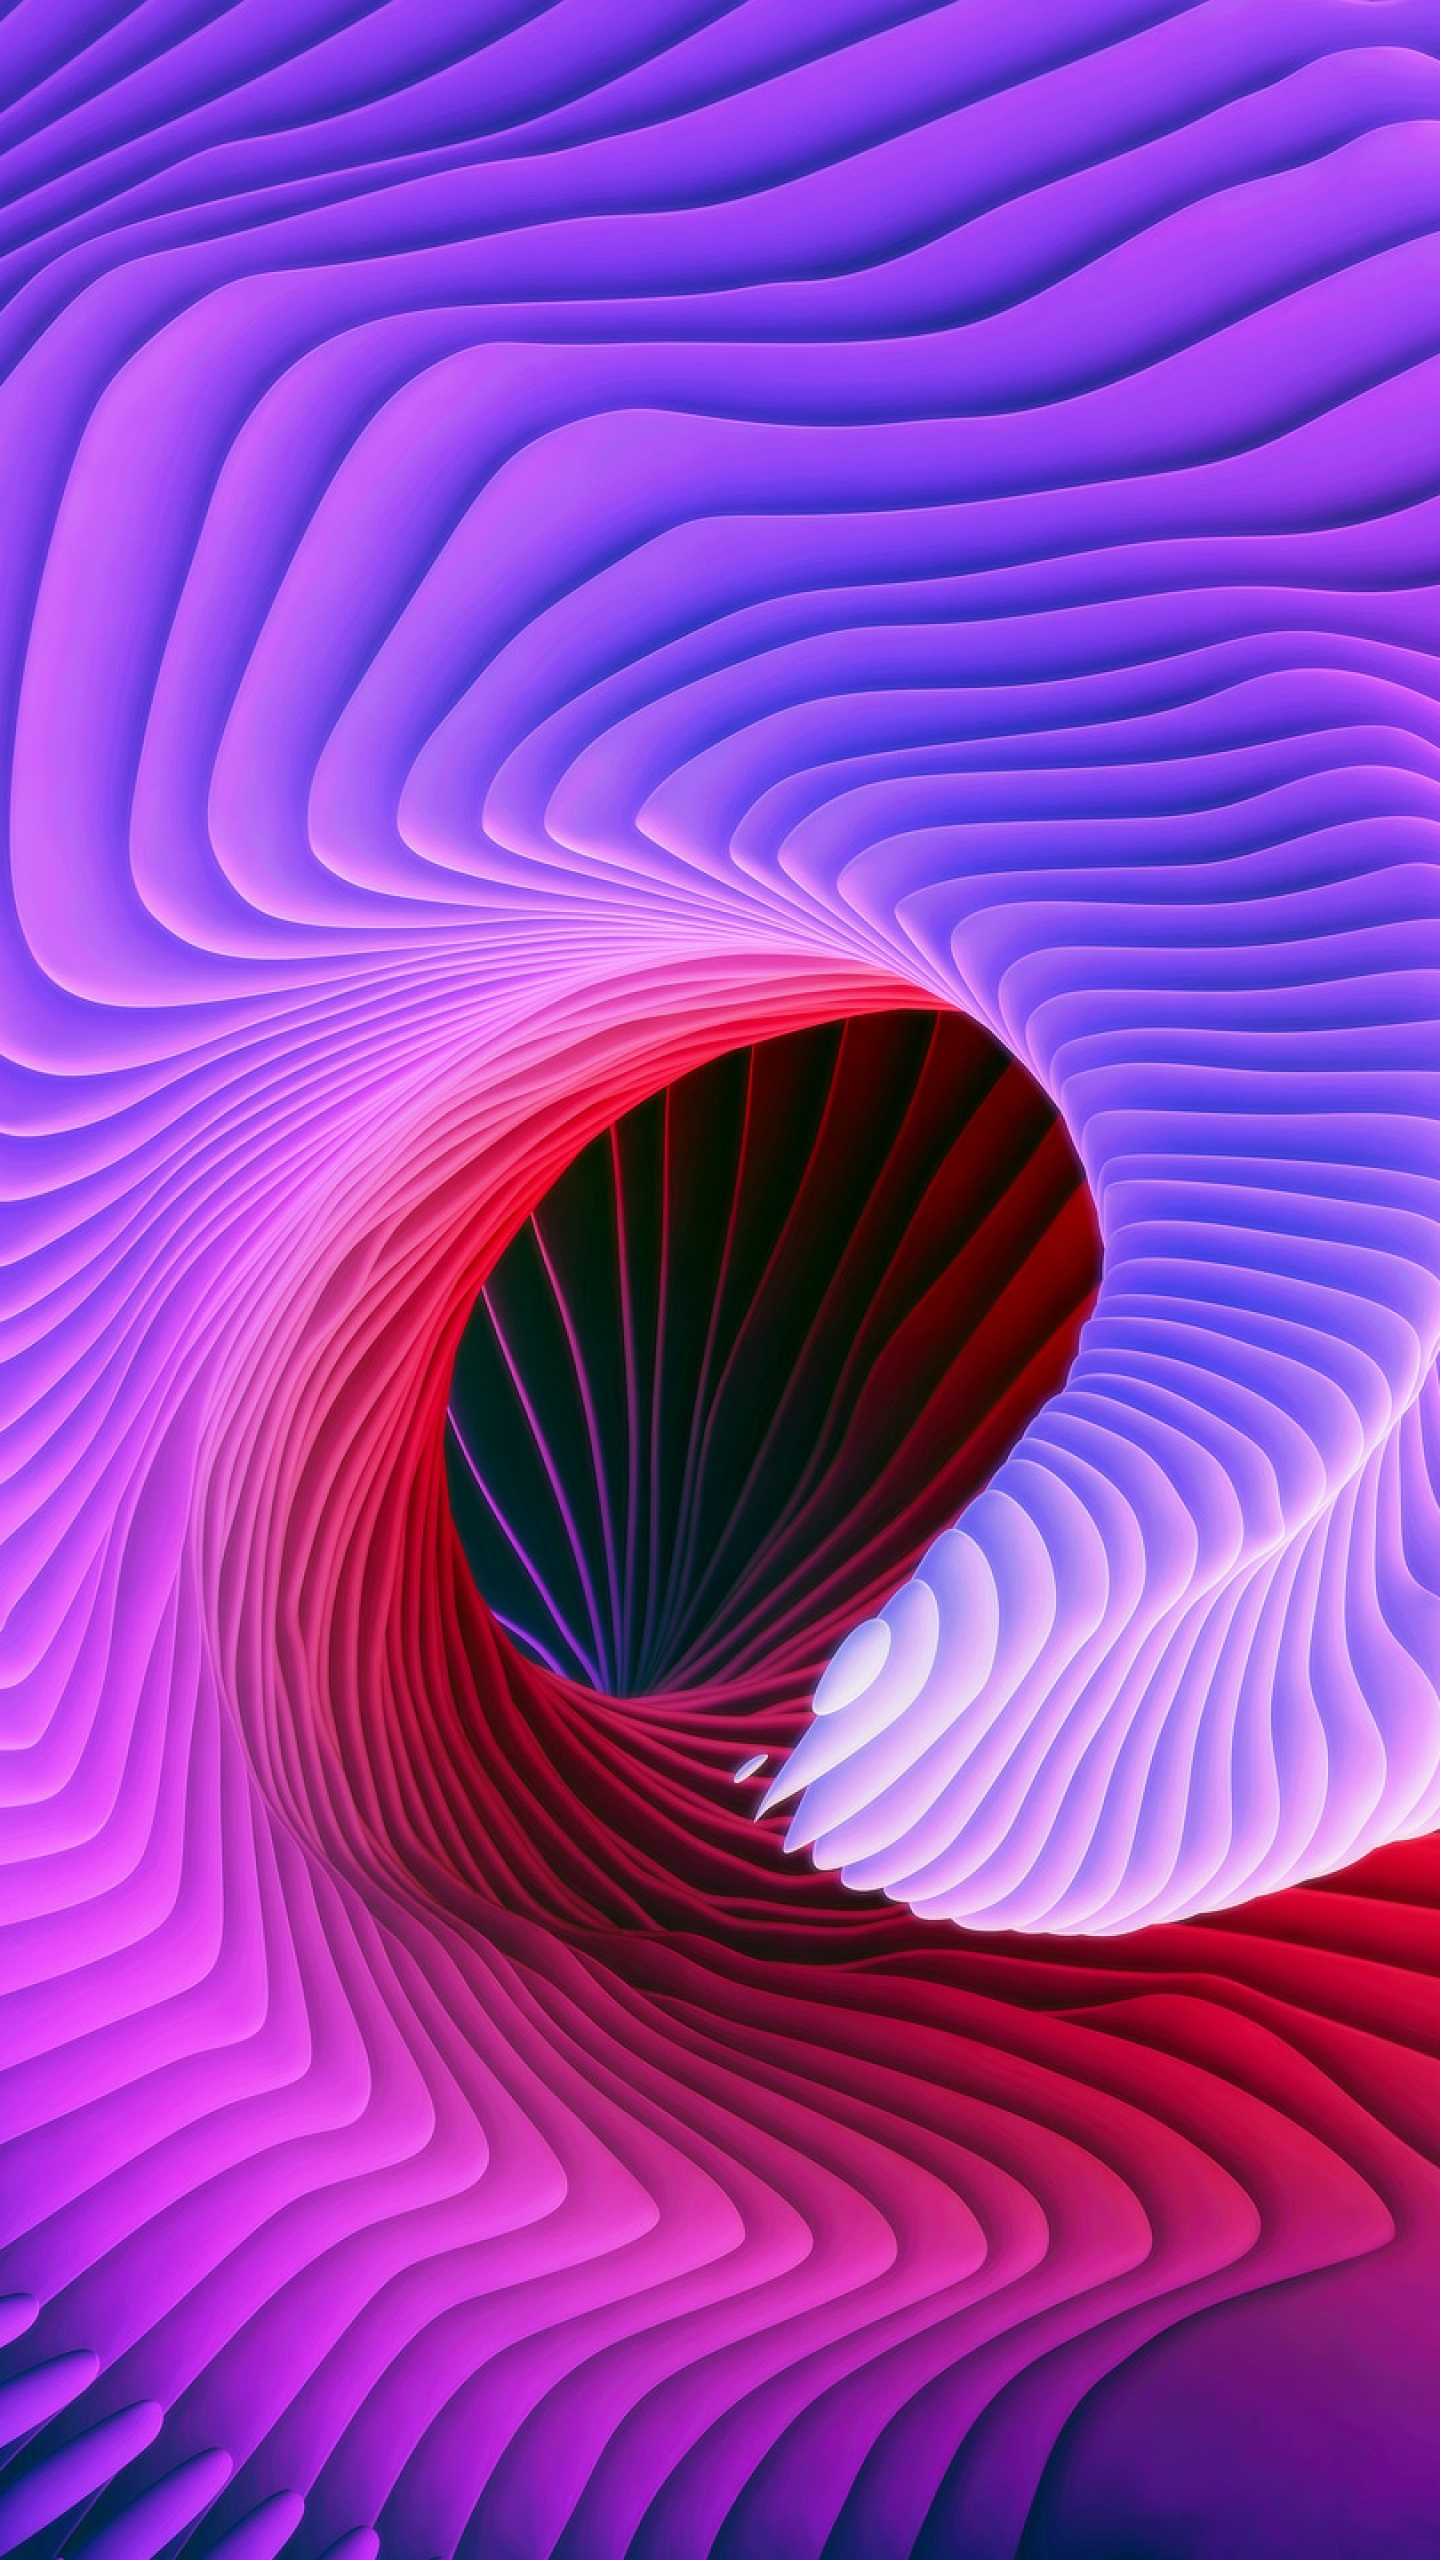 Spiral Wallpaper 4K, Spectrum, Colorful, Abstract, #1635